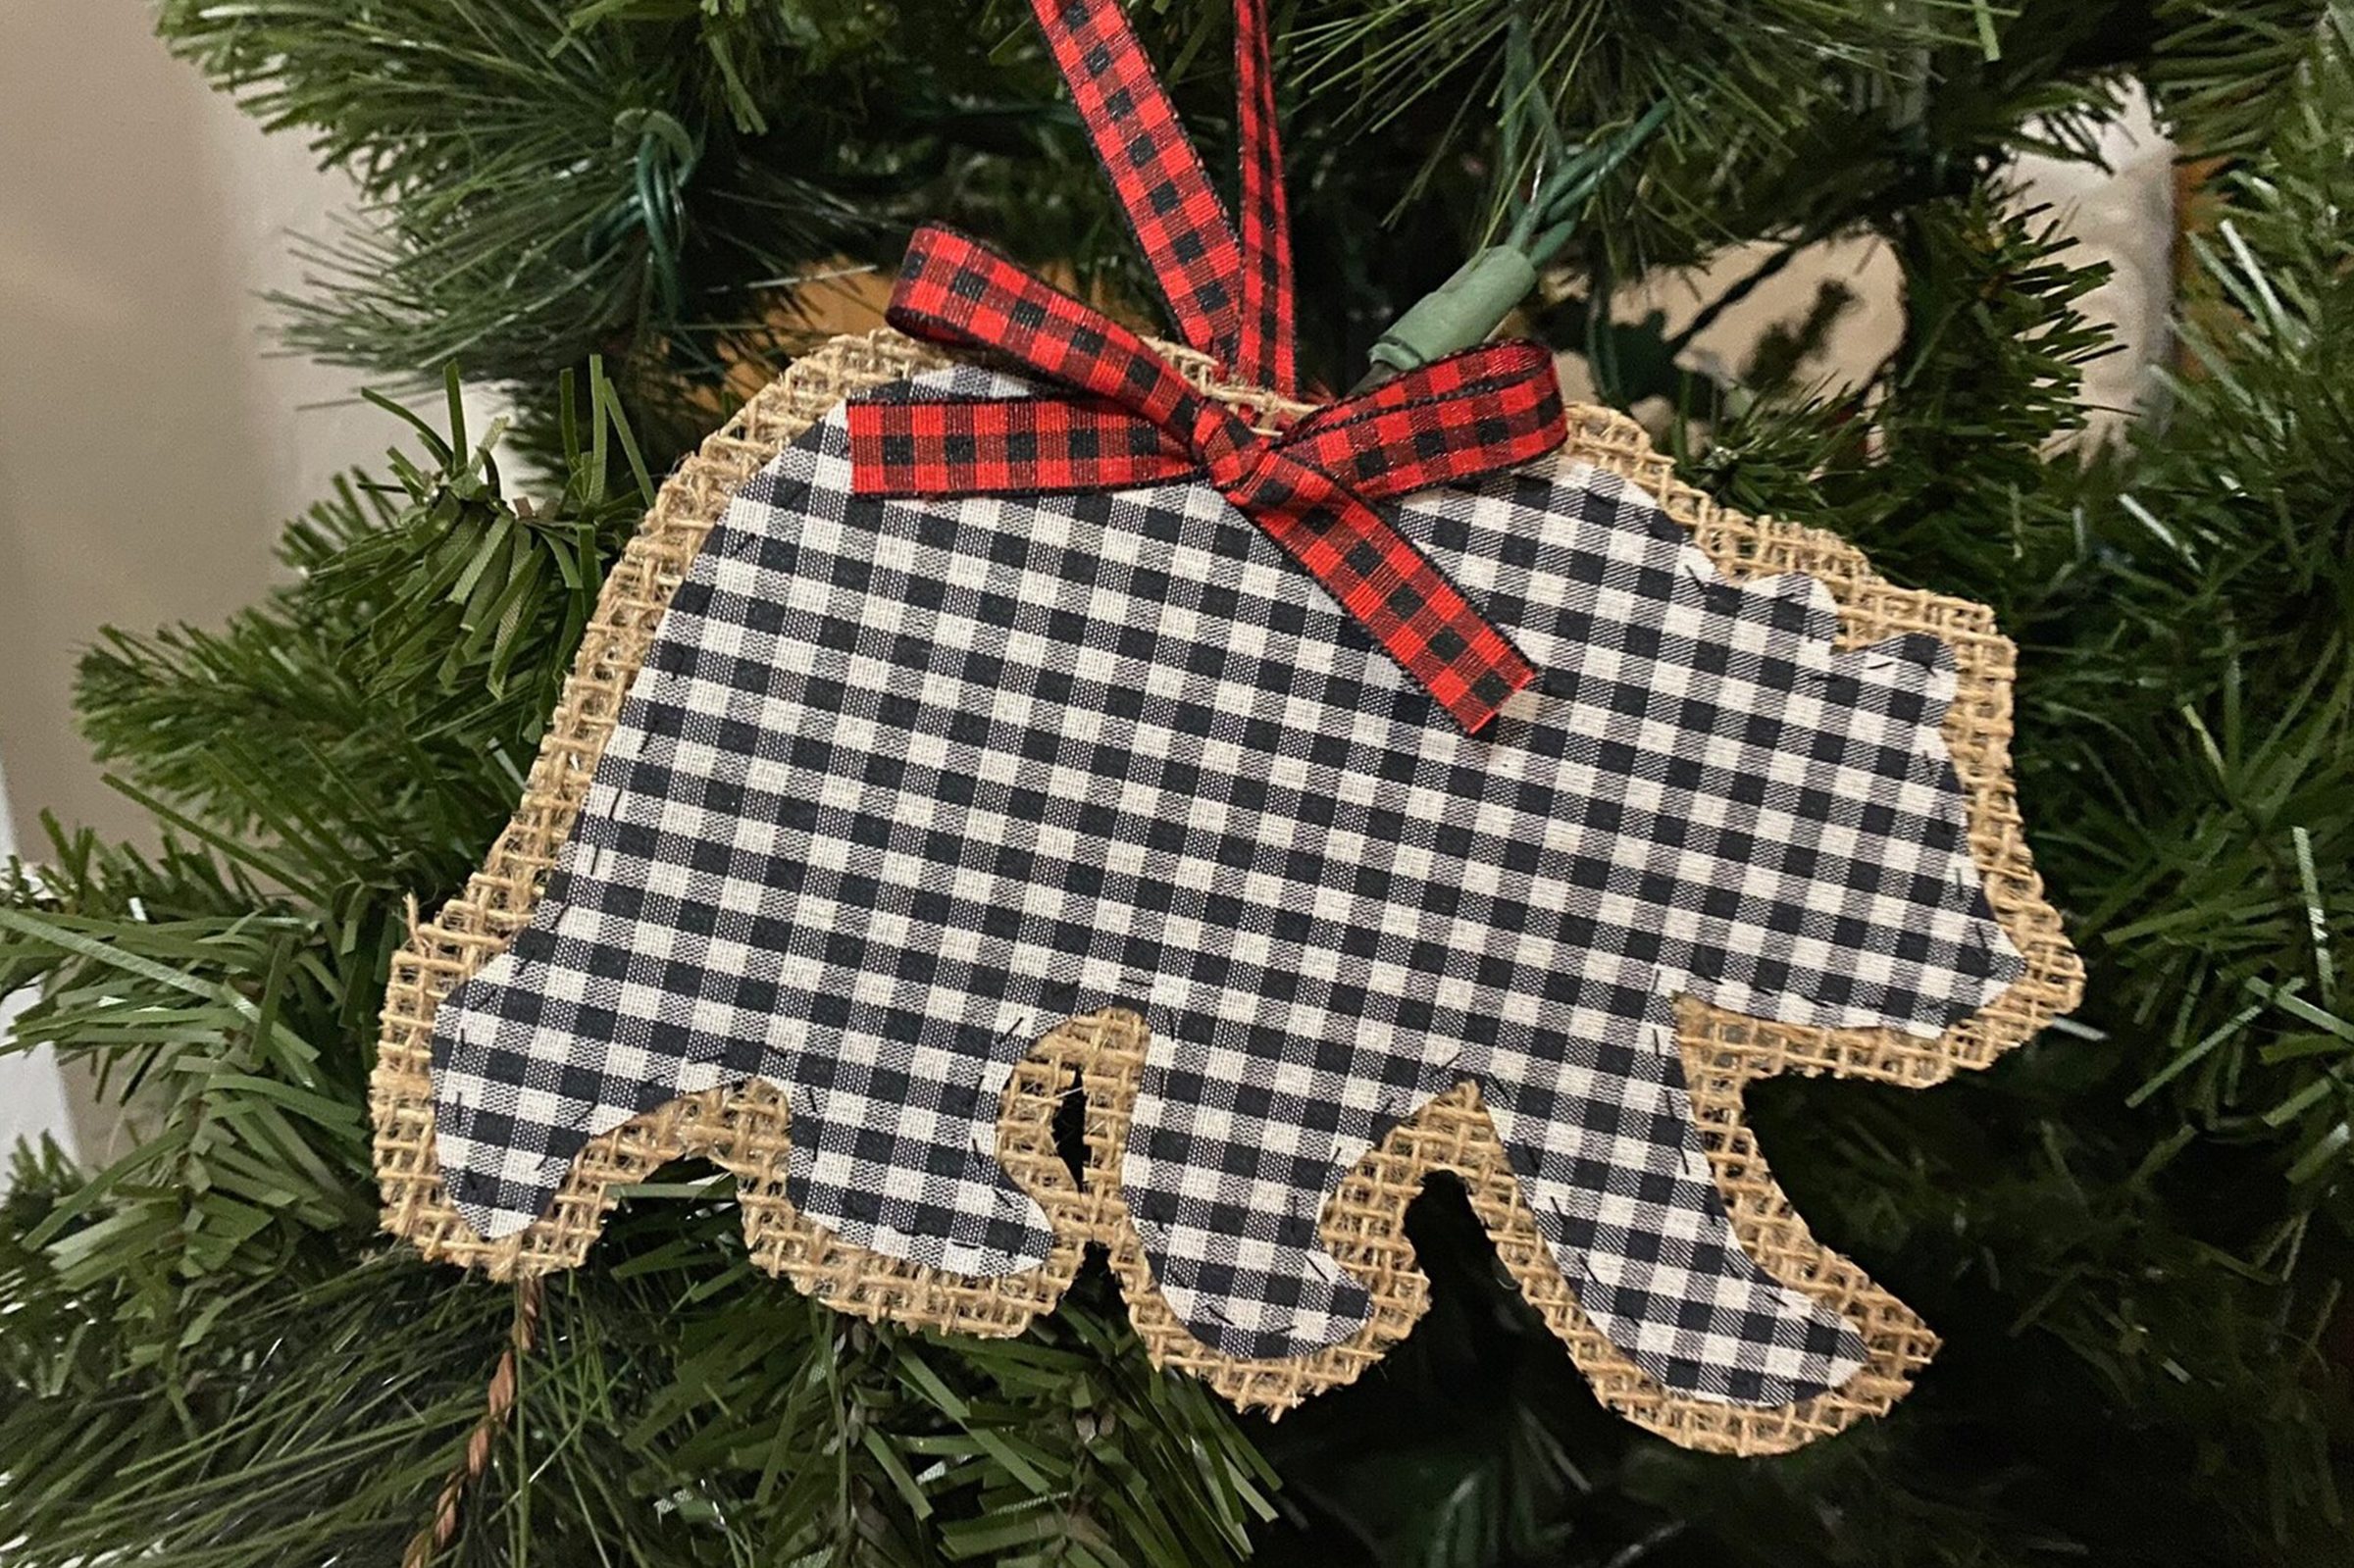 60 Pieces Wooden Tag Labels Christmas Wishes Tree Ornament Plaid Printed Wood Hanging Ornament Buffalo Wood Plaid Hanging Tag Merry Peace Joy Hanging Tag with Jute Ropes for Christmas Tree Decoration